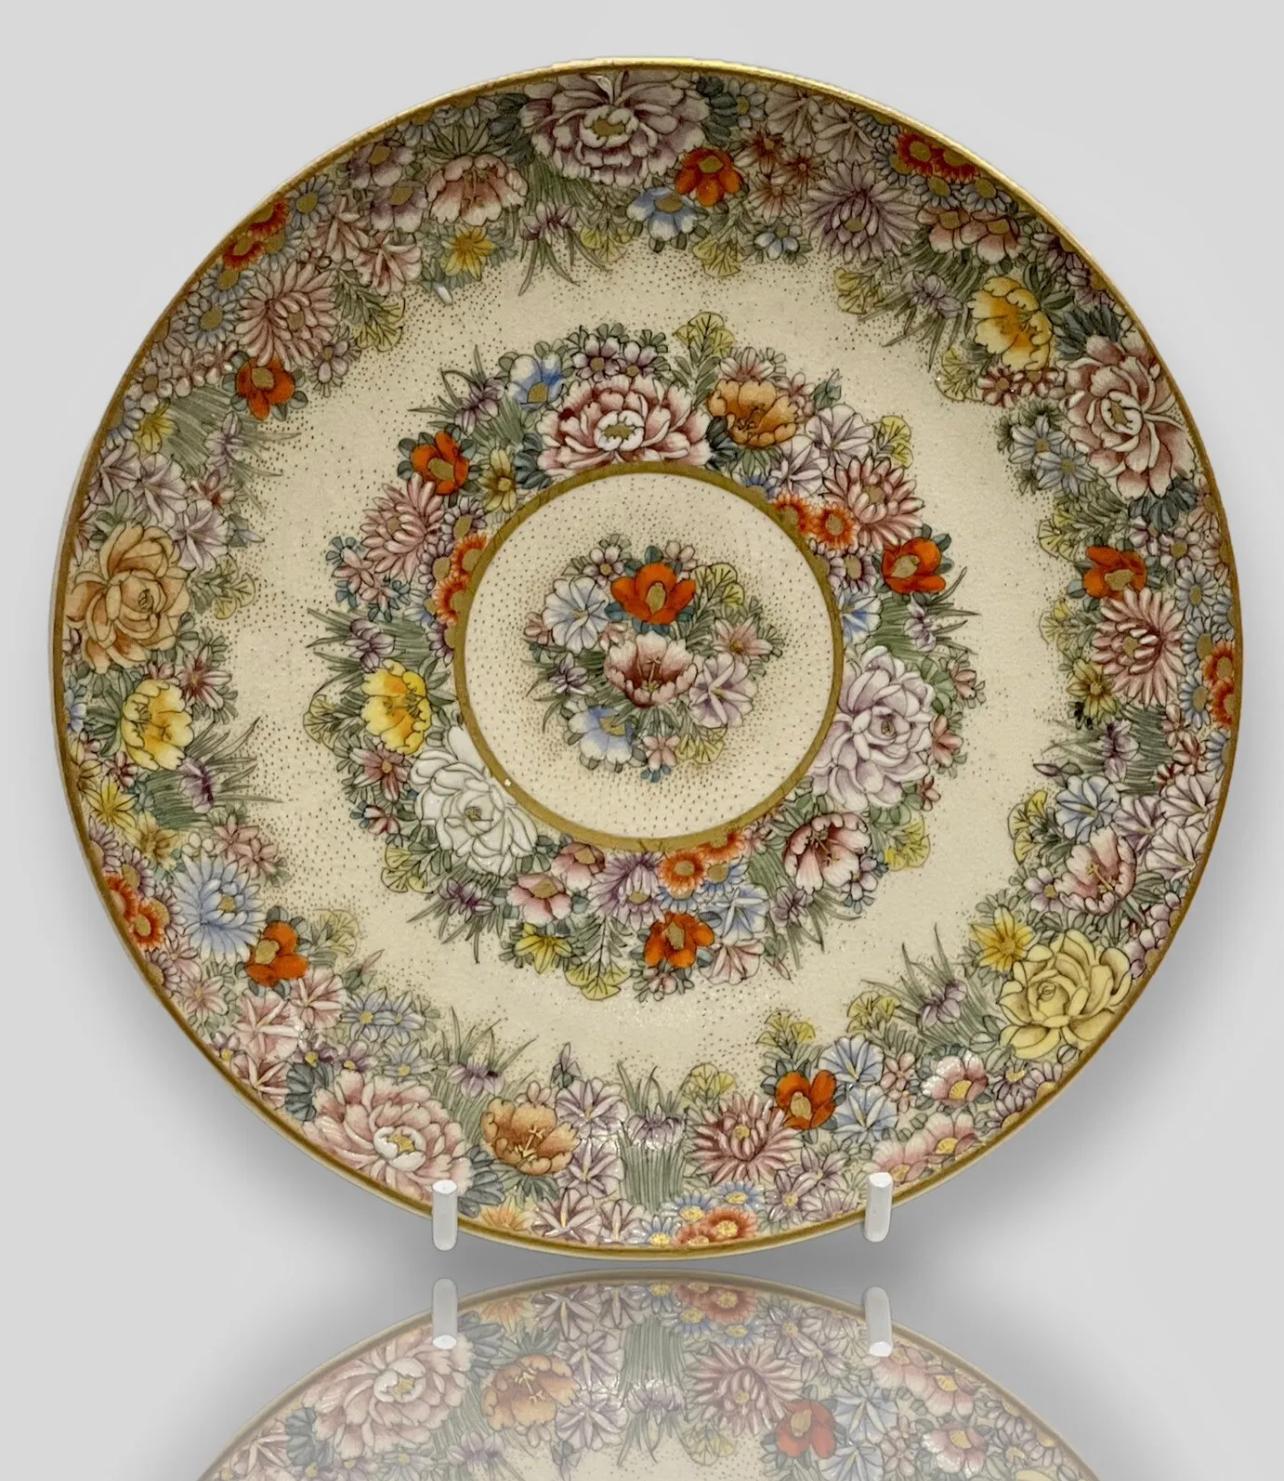 A Magnificent Satsuma Plate.
Late Meiji period, early 20th C. Signed. 

Very elegant Japanese satsuma plate hand painted with a magnificent floral decorations. The painting is a top quality and very detailed, some elements of the flowers are